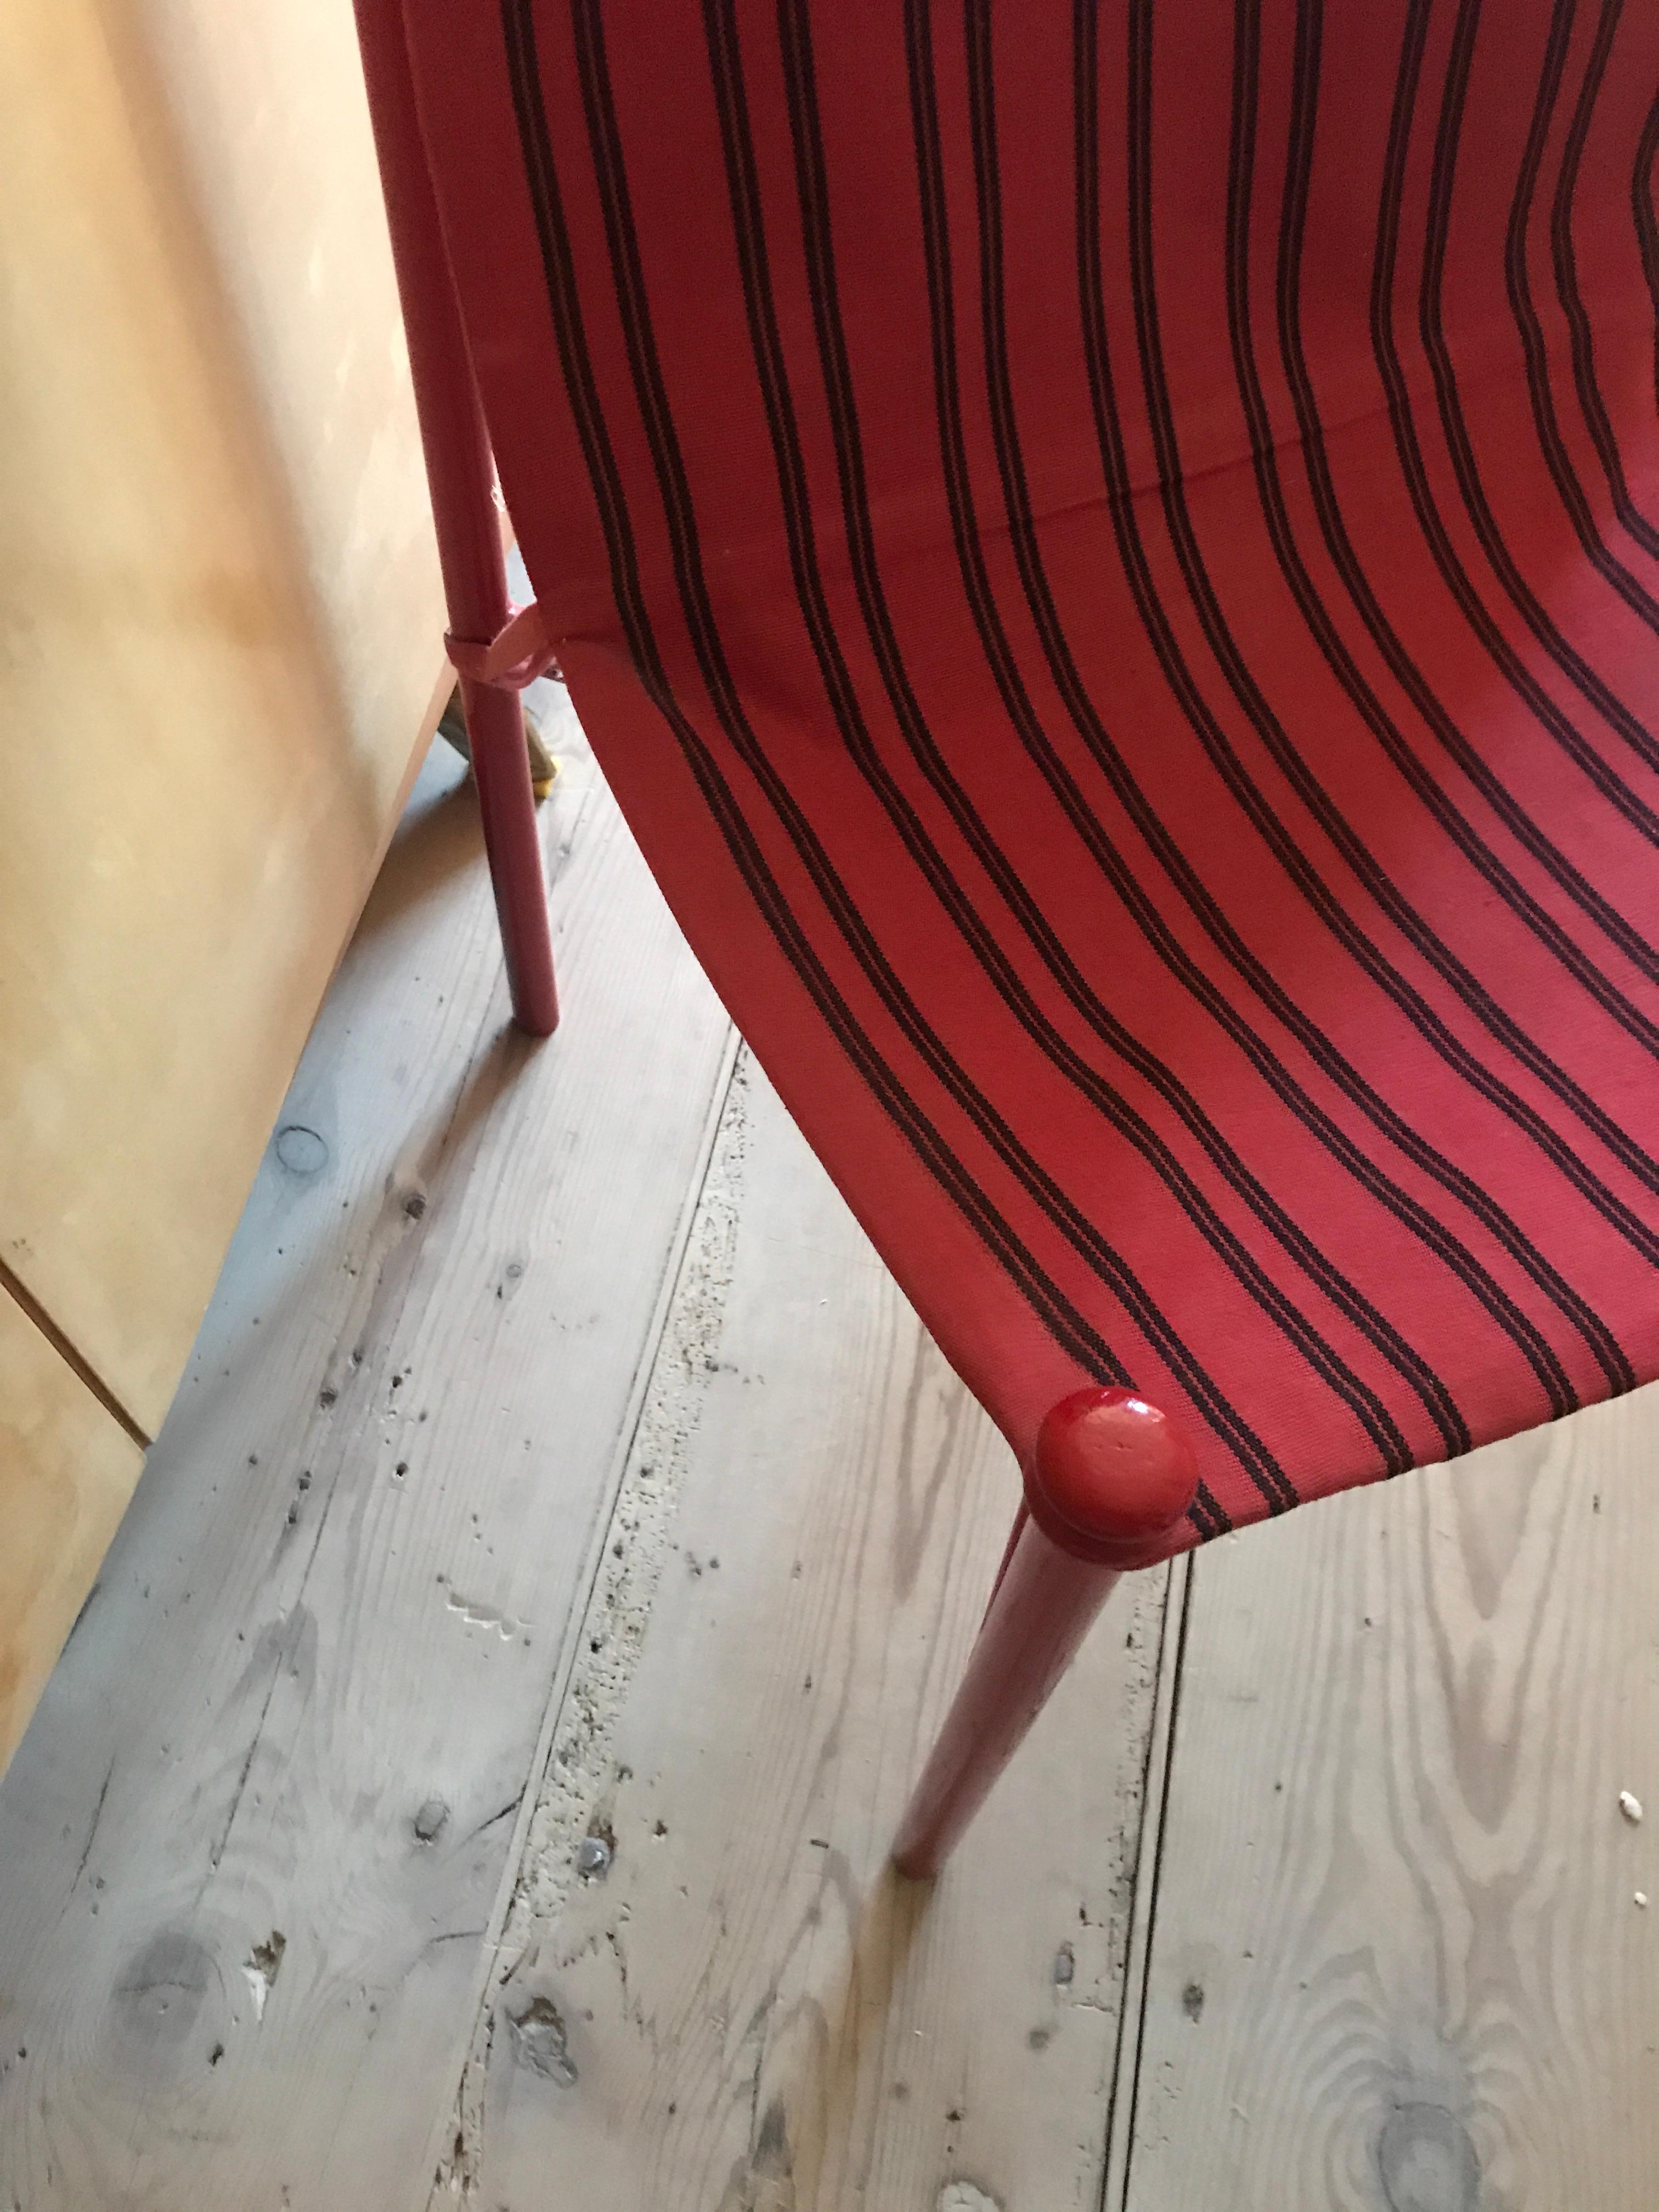 Vintage Felix Aublet Chair in Red Tubular Steel and Striped Fabric, France, 1935 For Sale 2